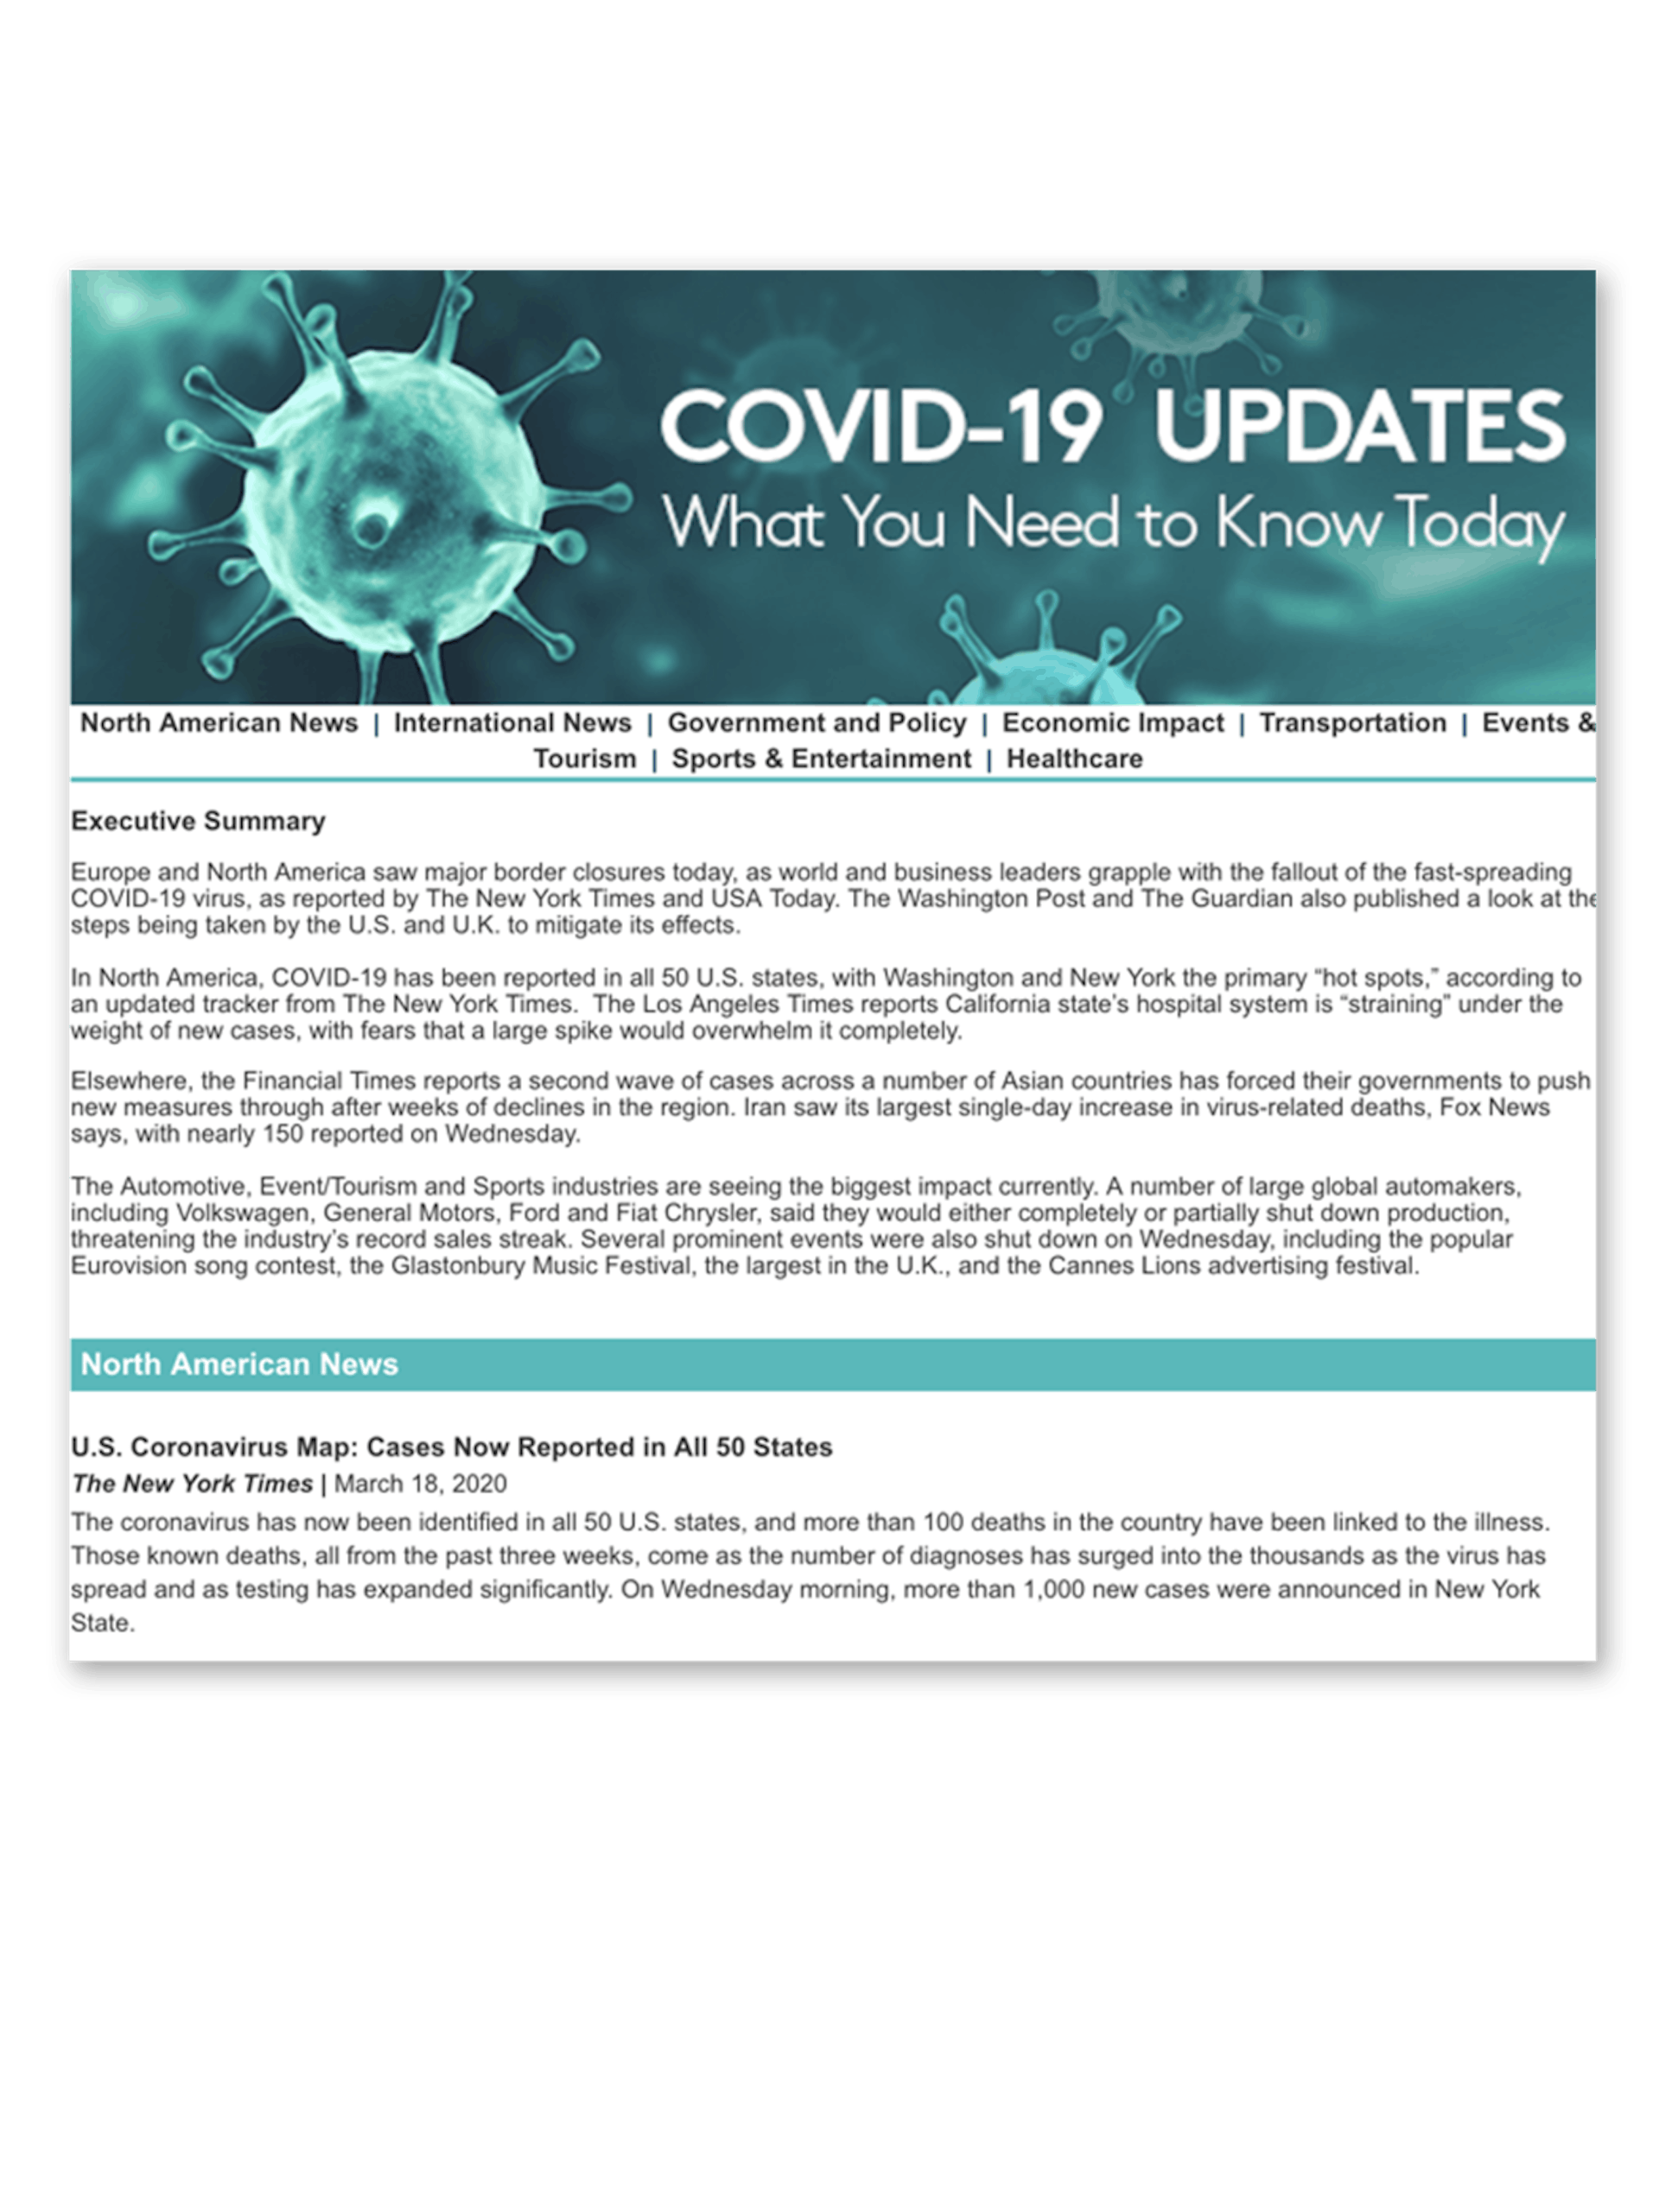 COVID-19 Updates Landing Page from Meltwater